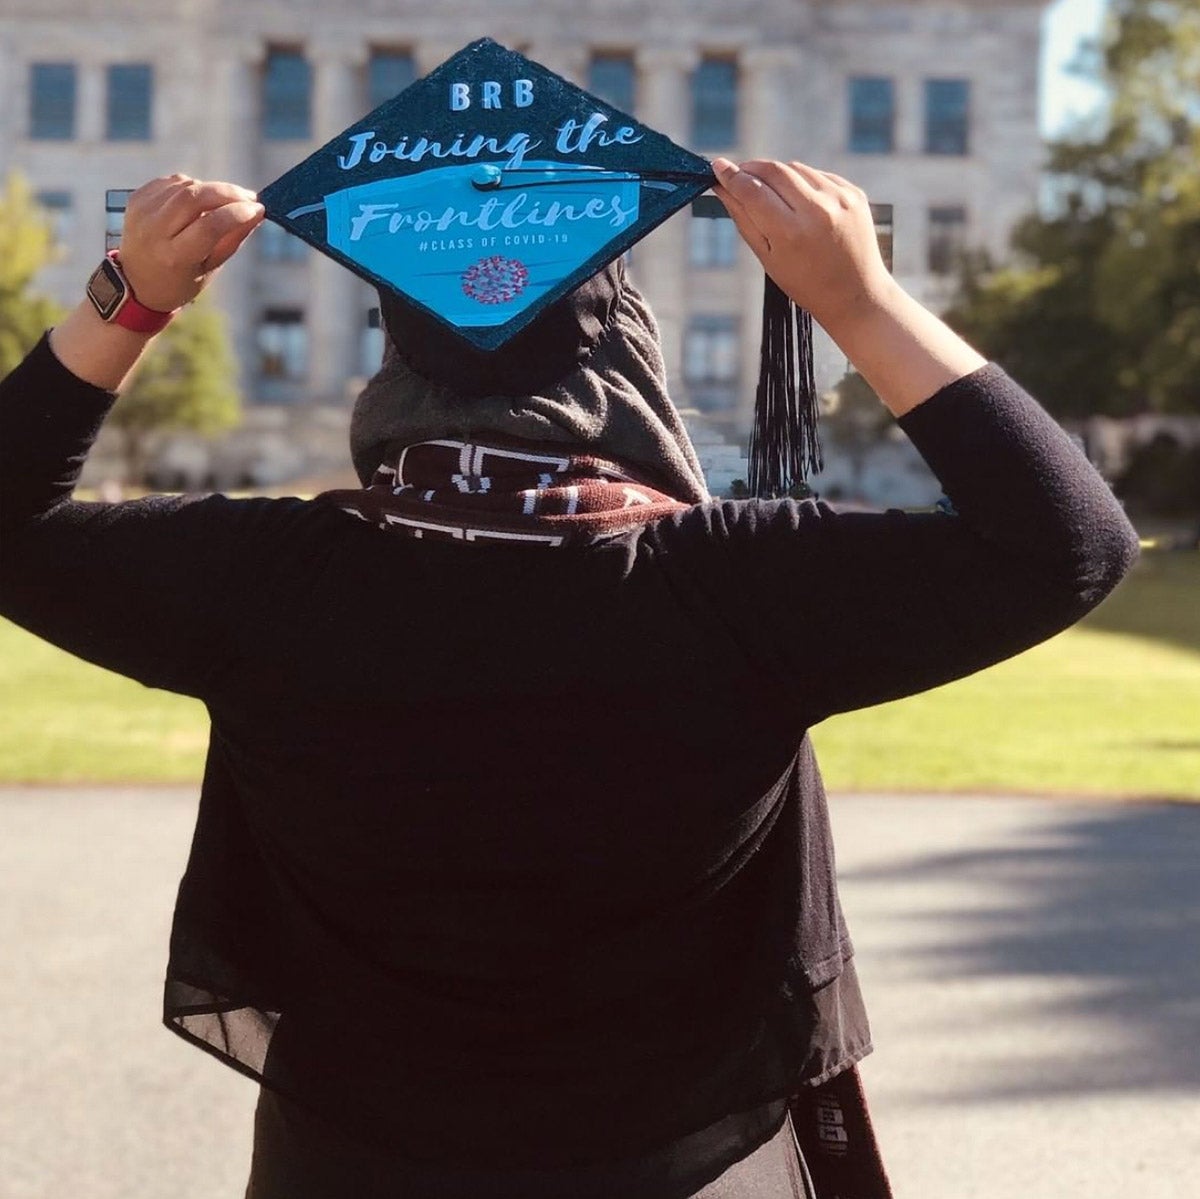 Photo of Taha Khan from behind to show her graduation cap, which reads "BRB Joining the Frontlines"